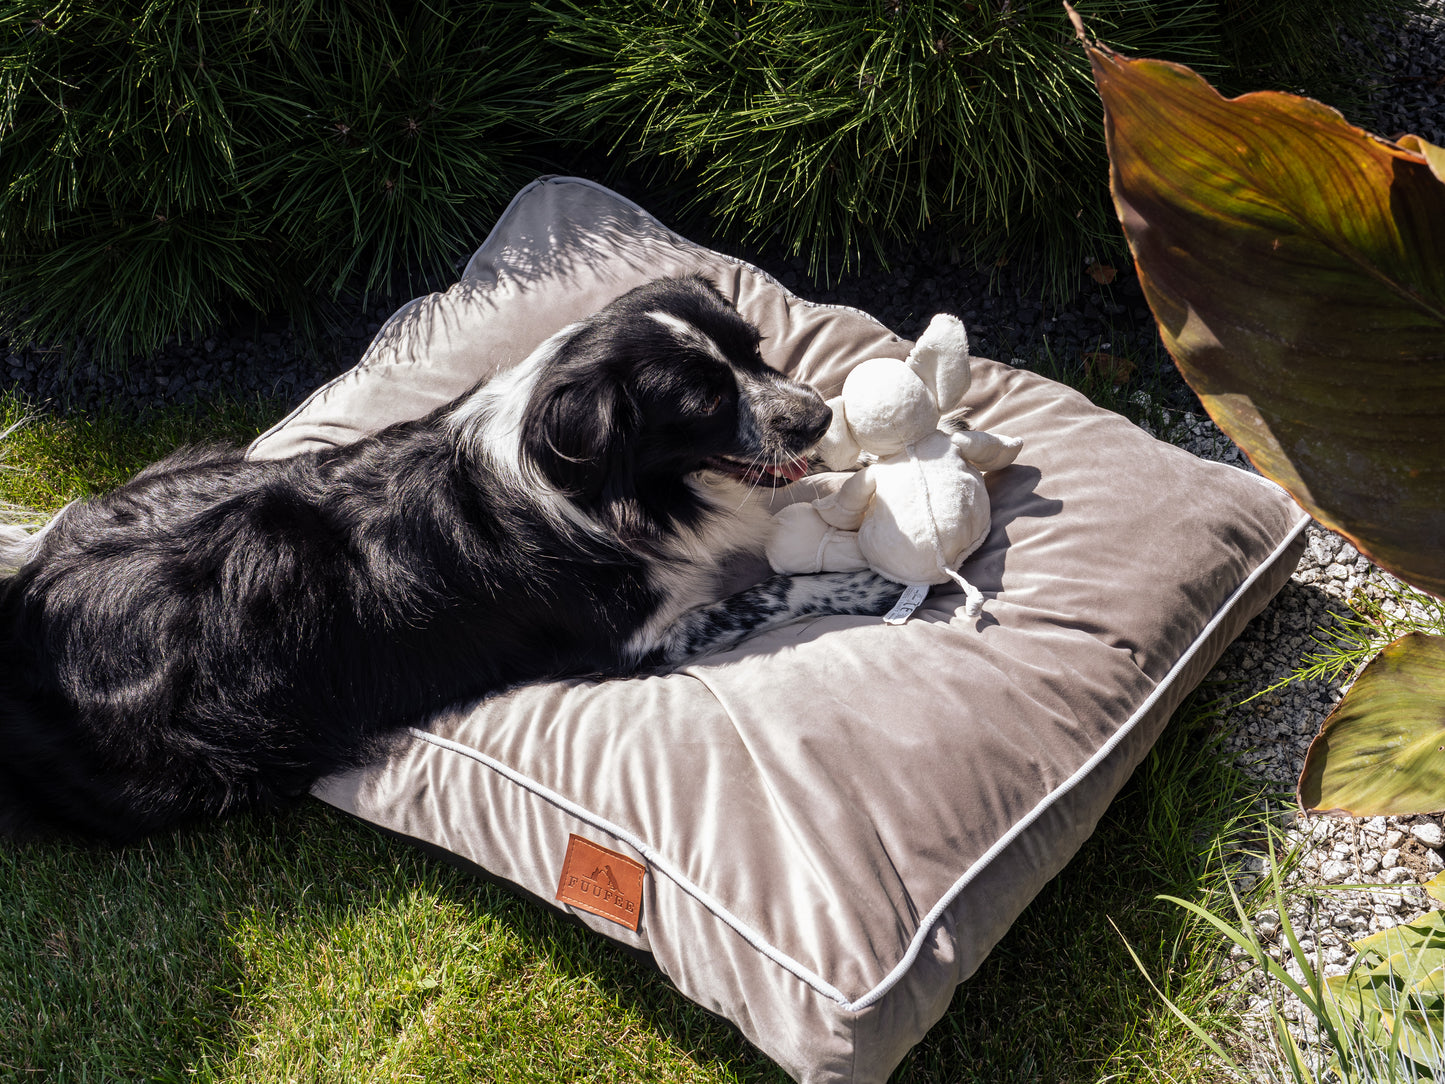 CUSHION/KENNEL/MATTRESS for indoor and outdoor PERRO dogs - Handmade by professional craftsmen.